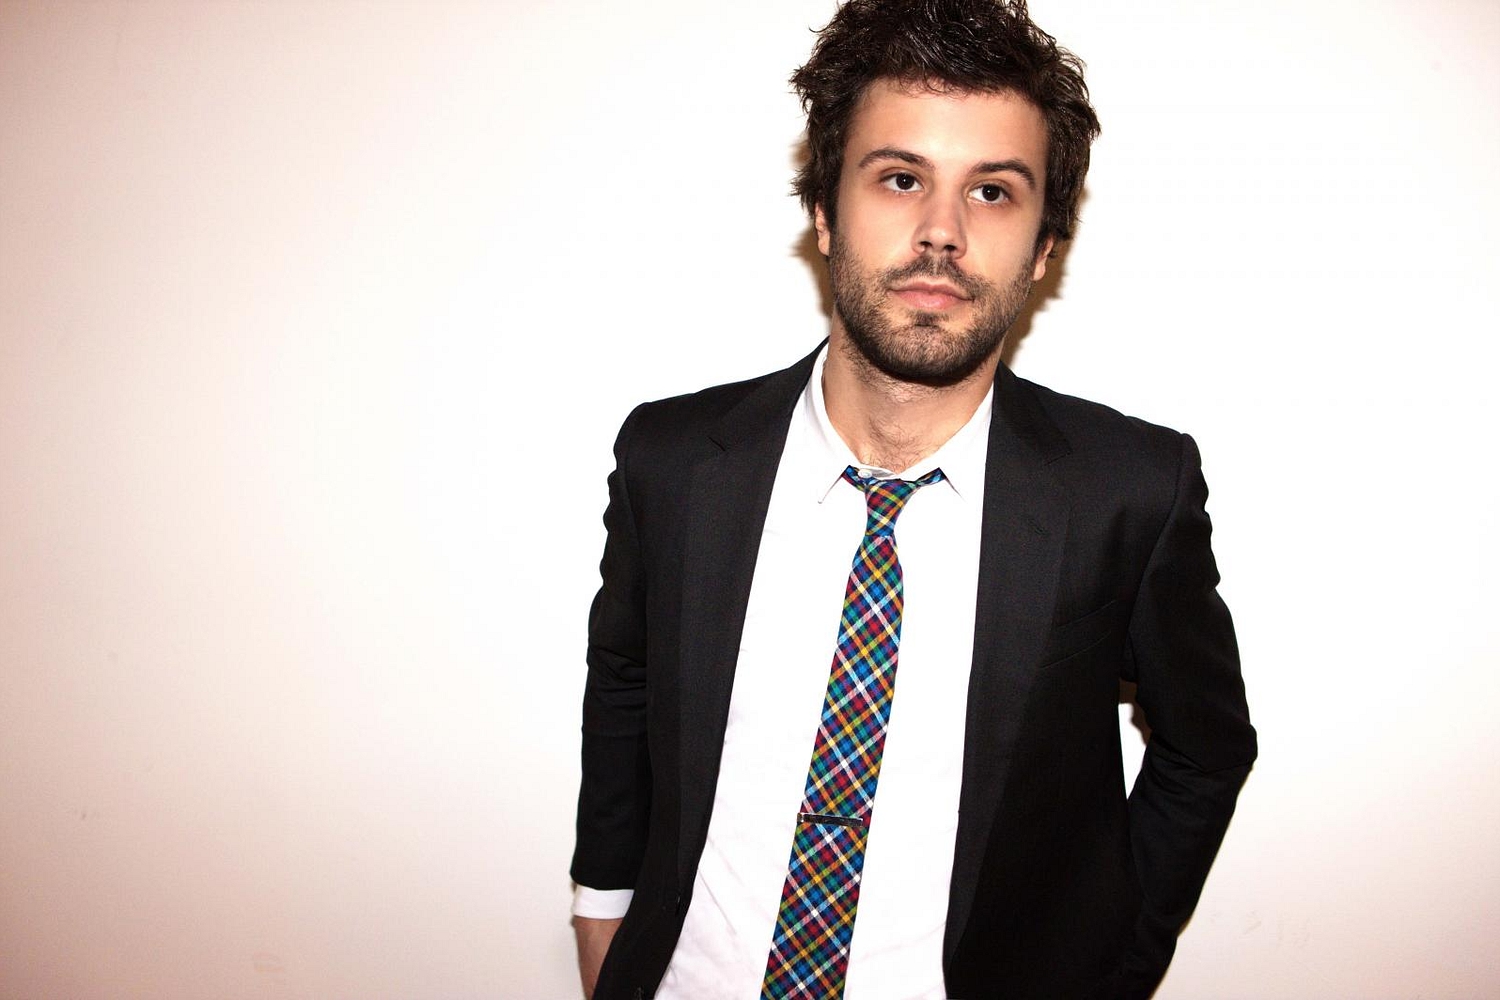 Passion Pit stream new album ‘Kindred’ in US